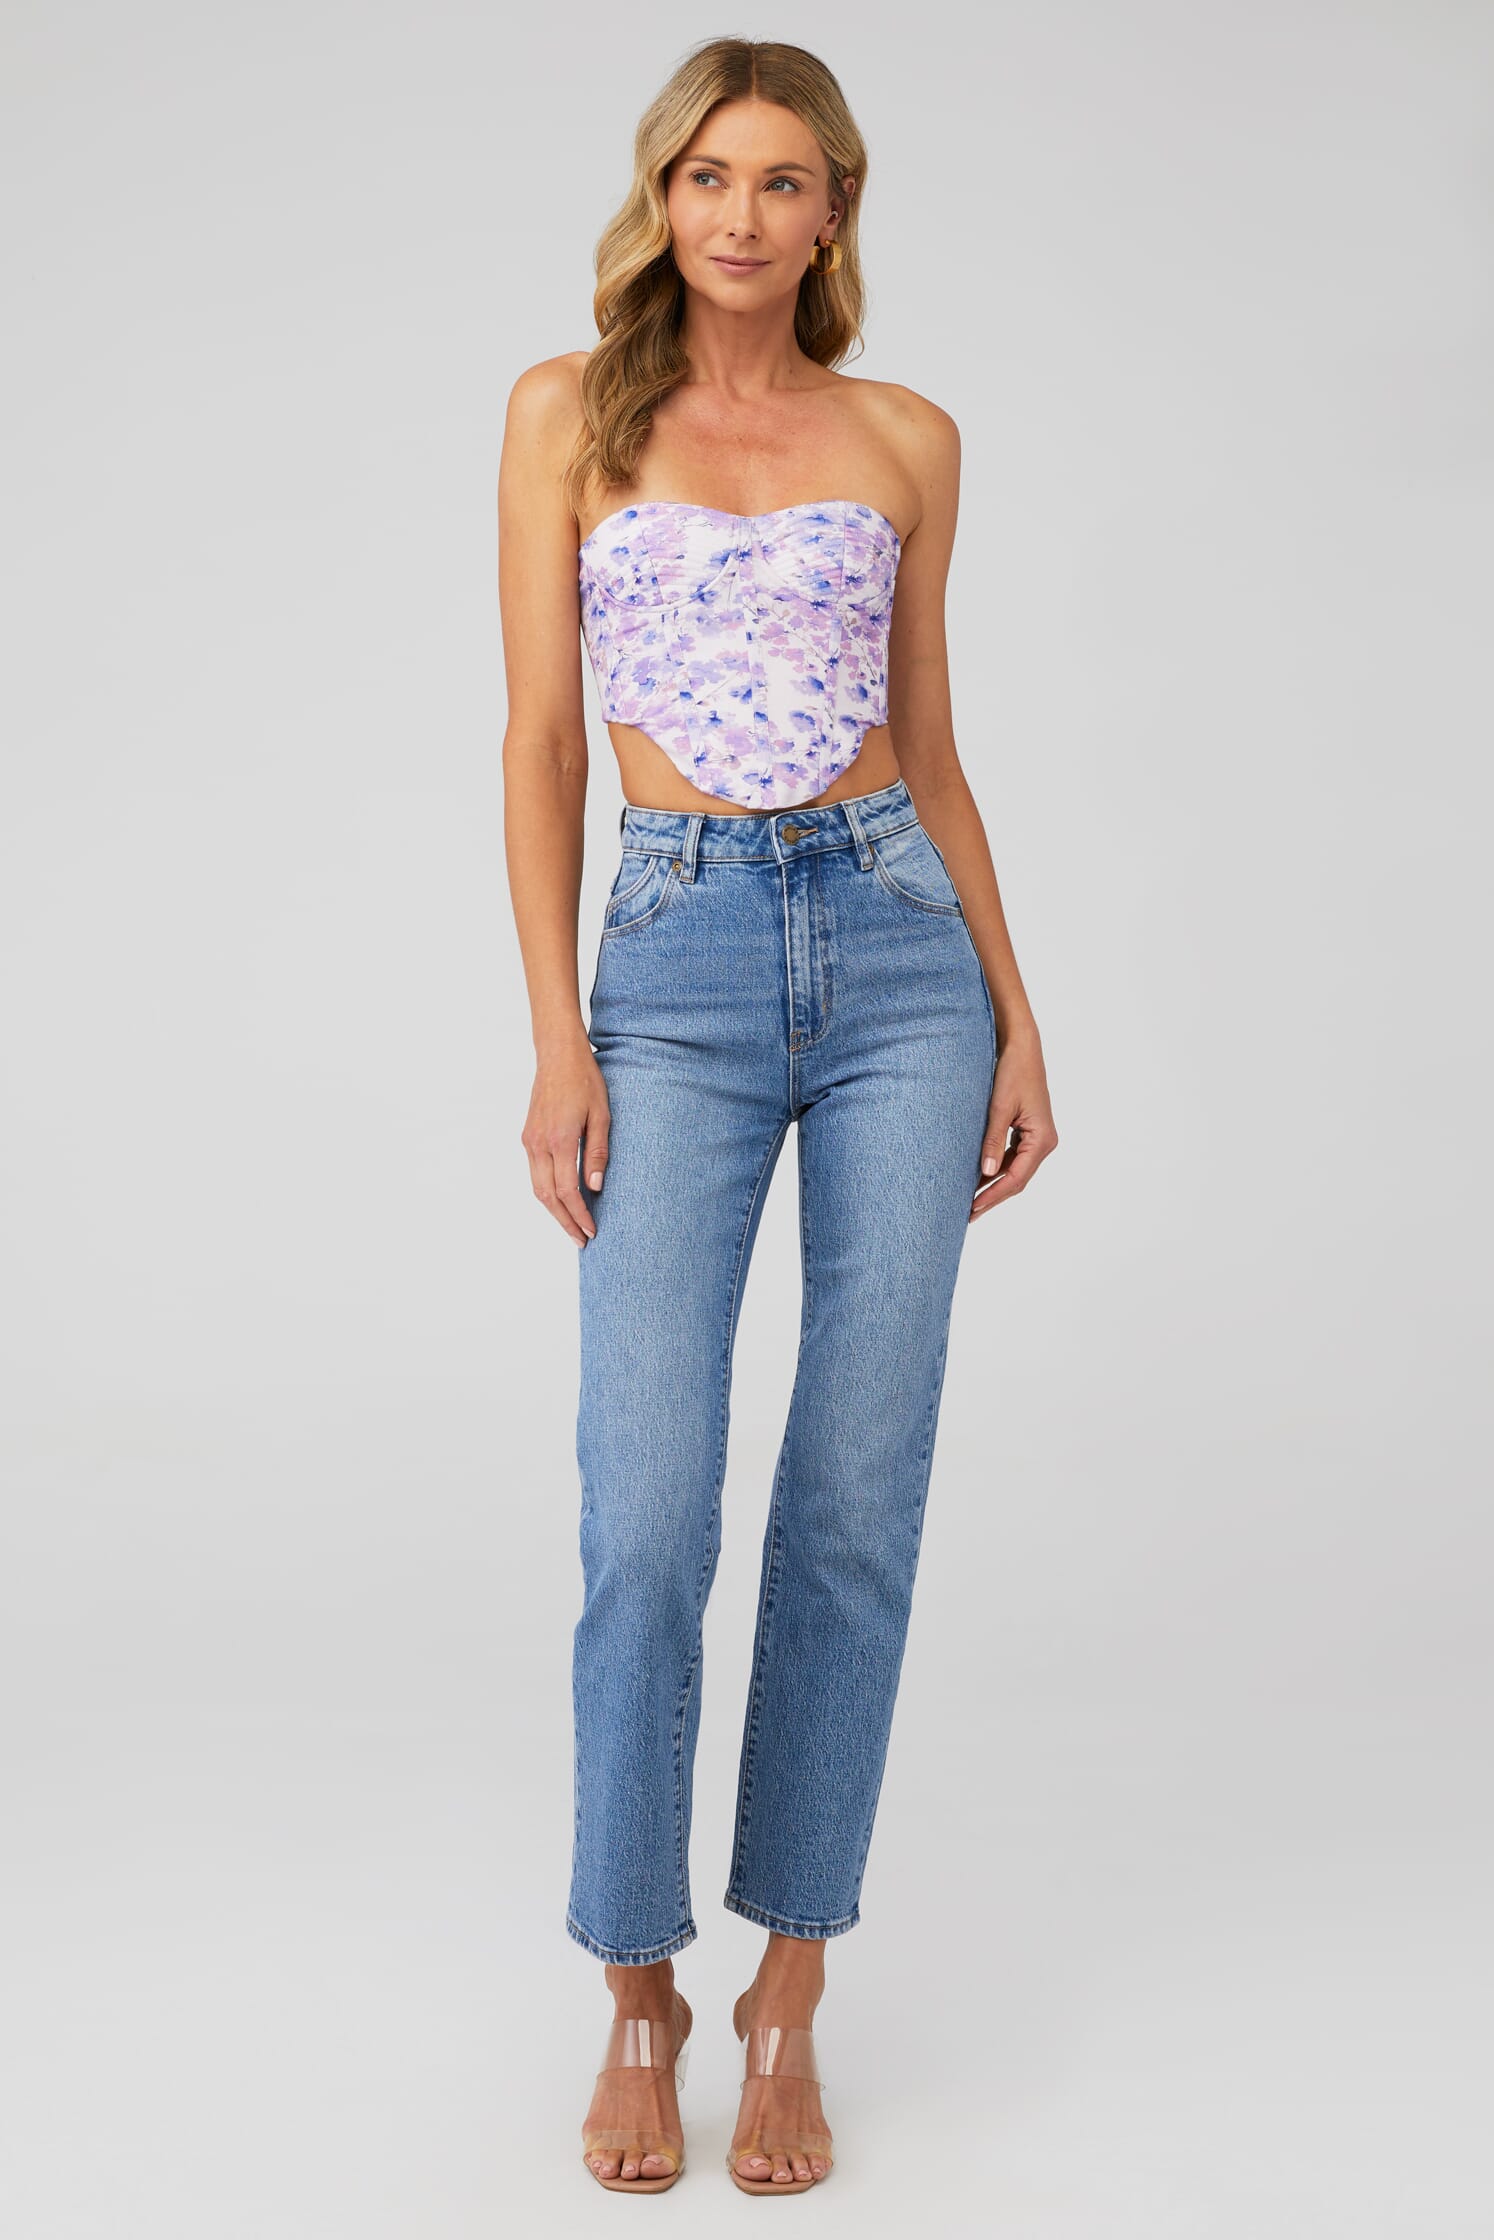 Bardot Mirabelle Floral Bustier in Lilac Floral